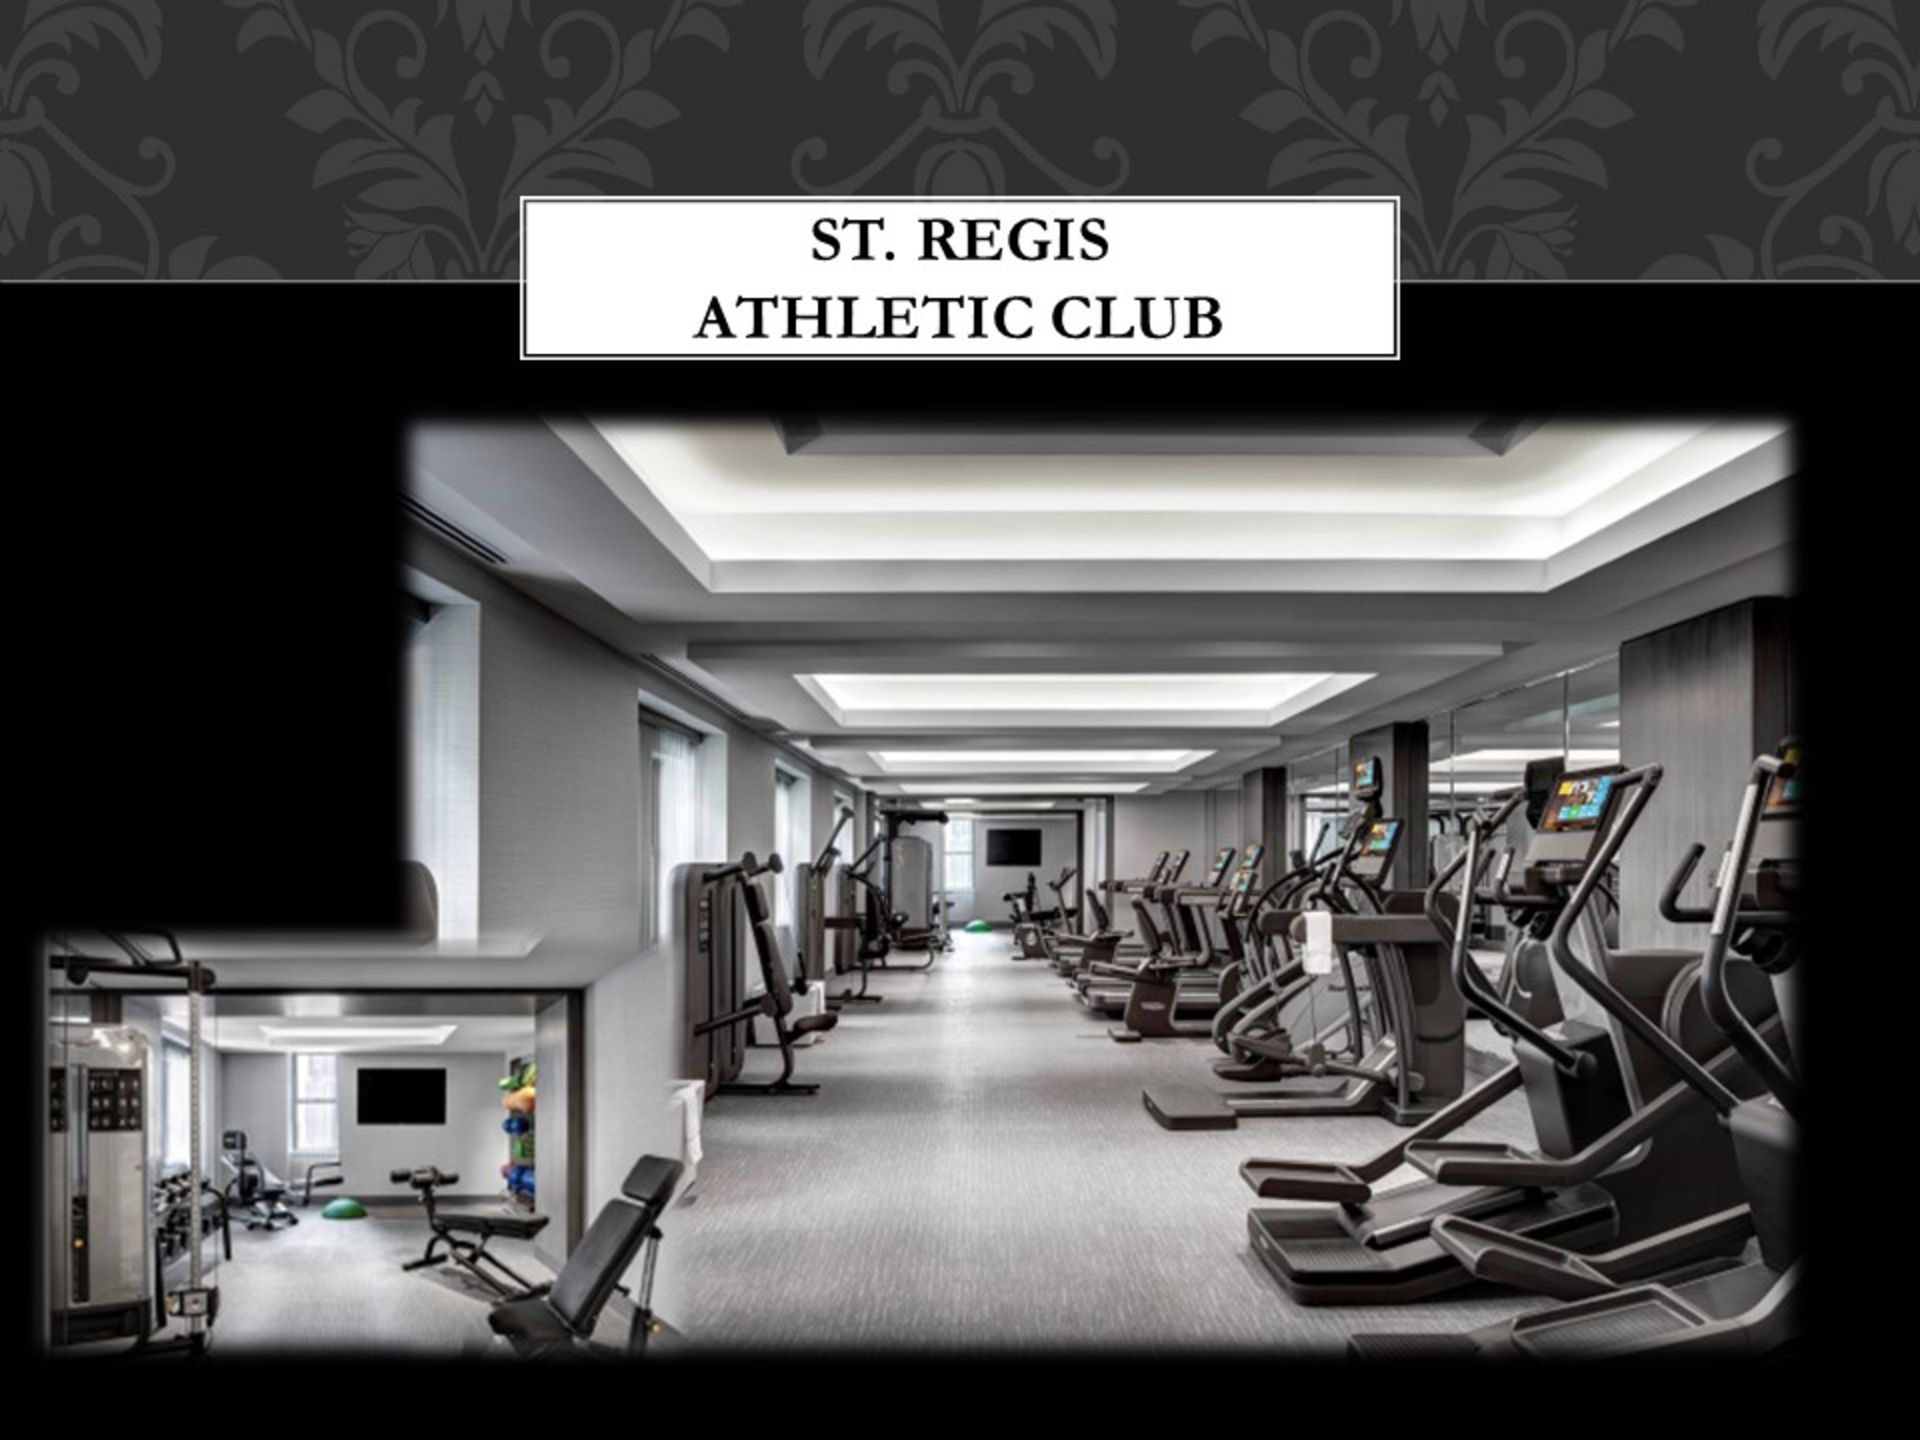 VACATION EXPERIENCE: St Regis, NYC - Image 16 of 19